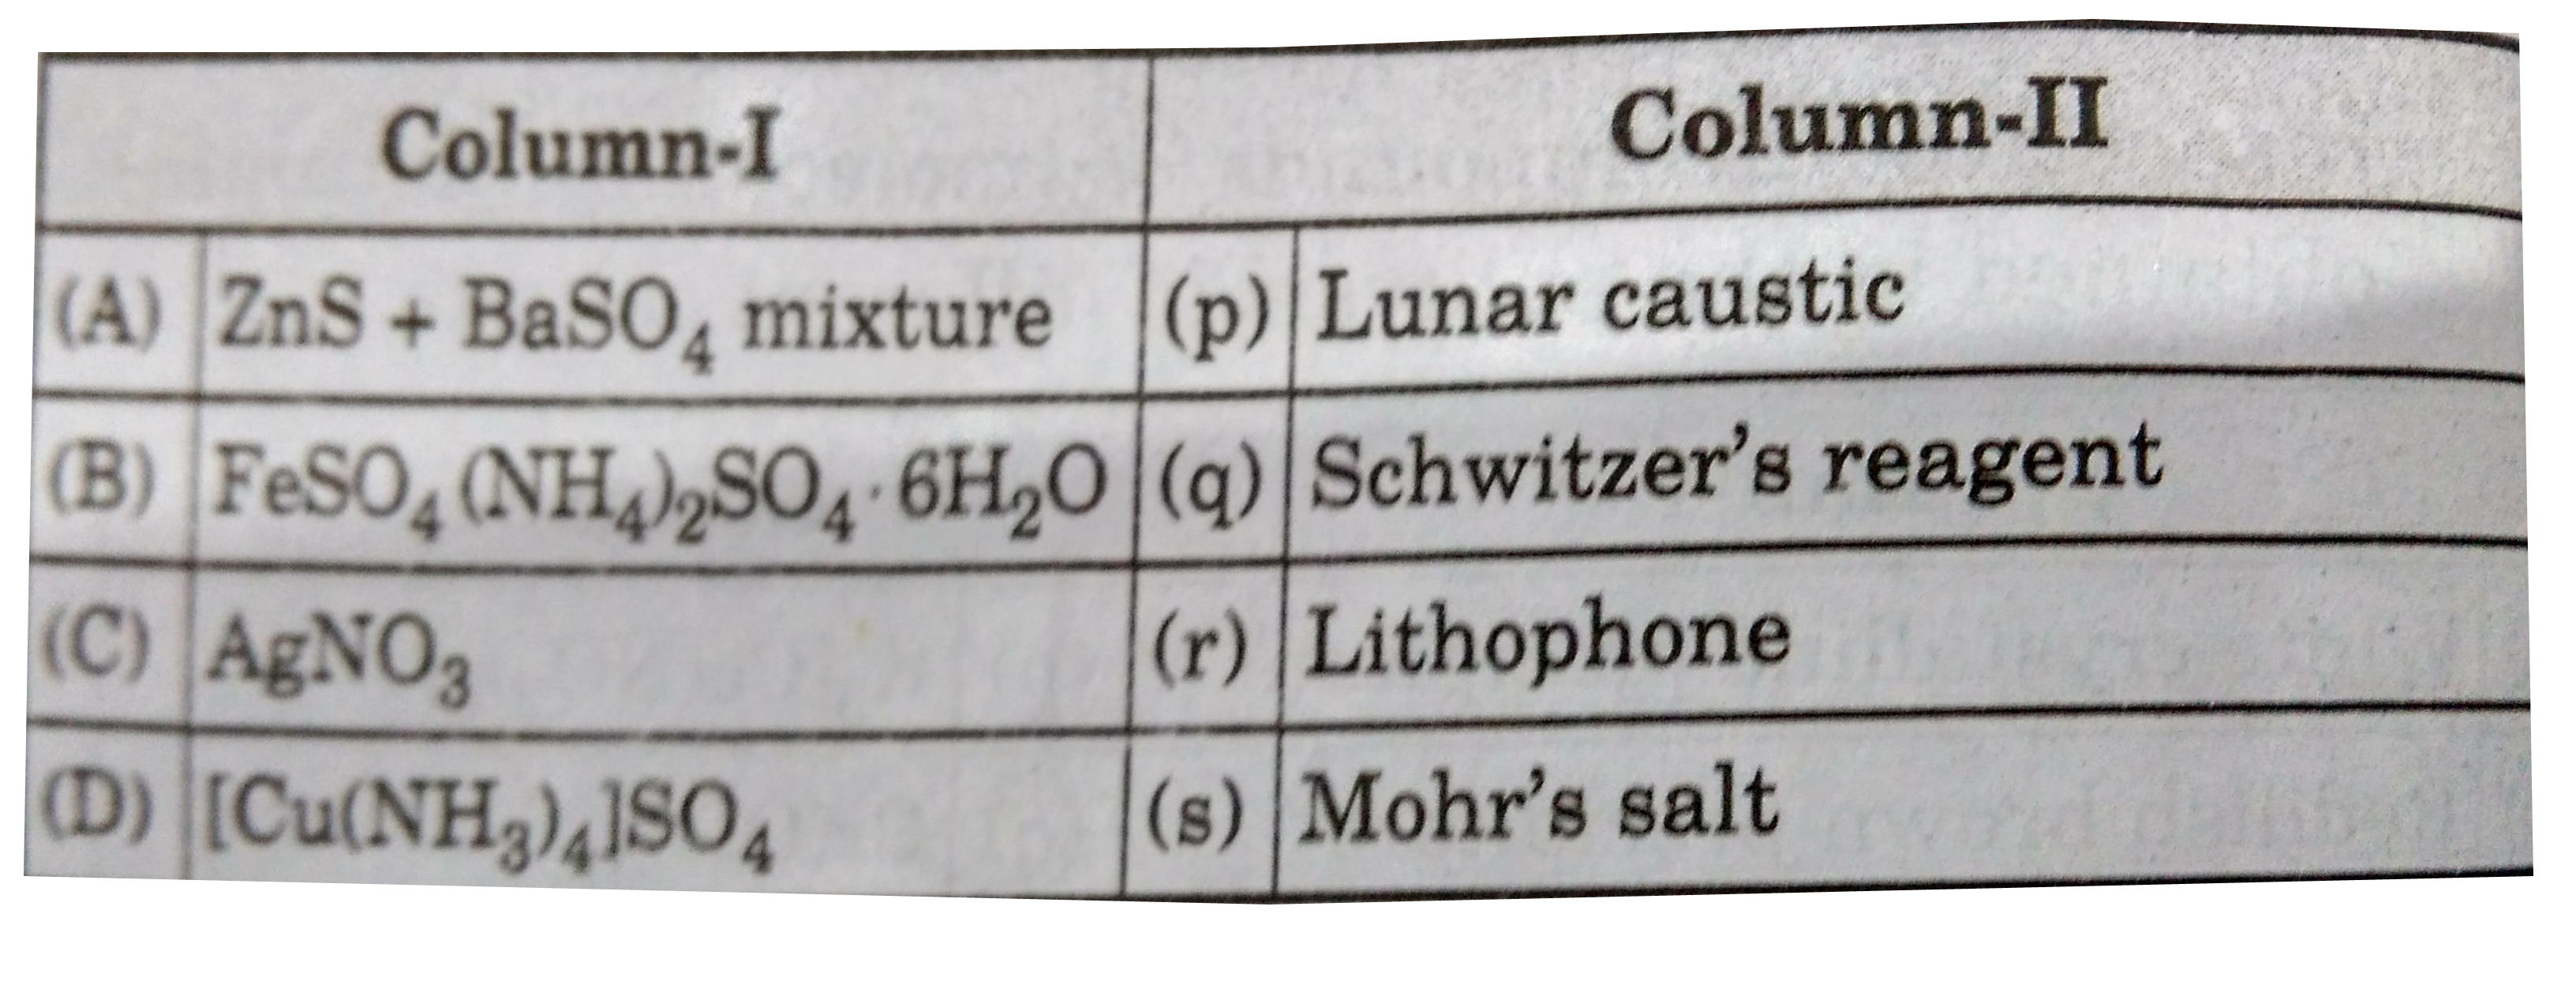 Match the salts/mixtures listed in column-I with their respective name listed in column-II.